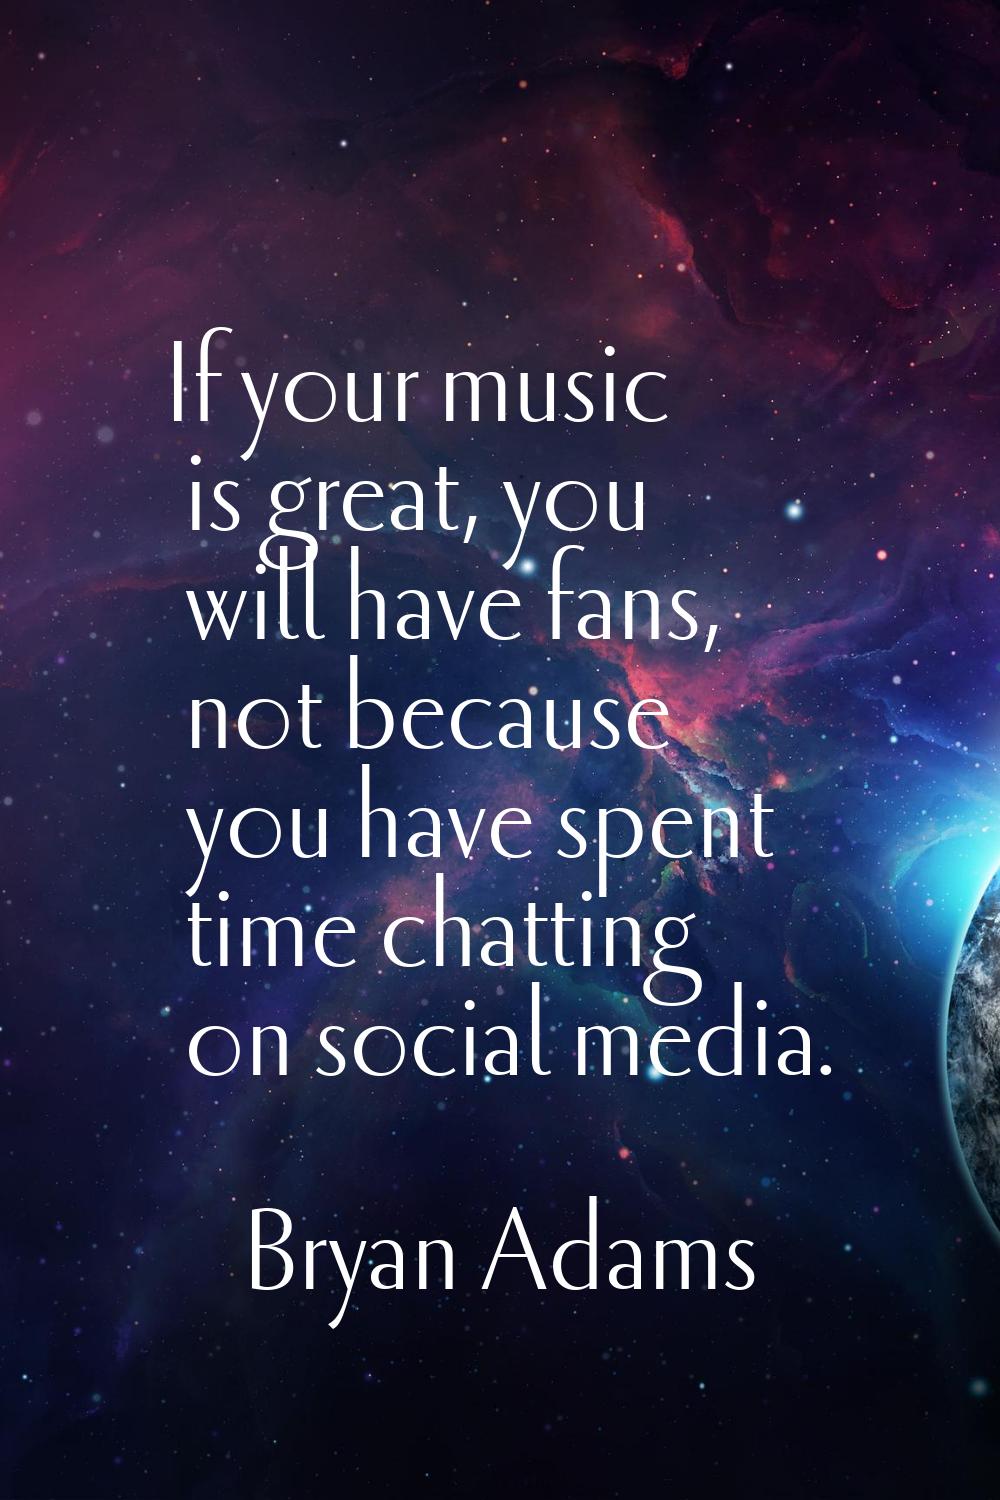 If your music is great, you will have fans, not because you have spent time chatting on social medi